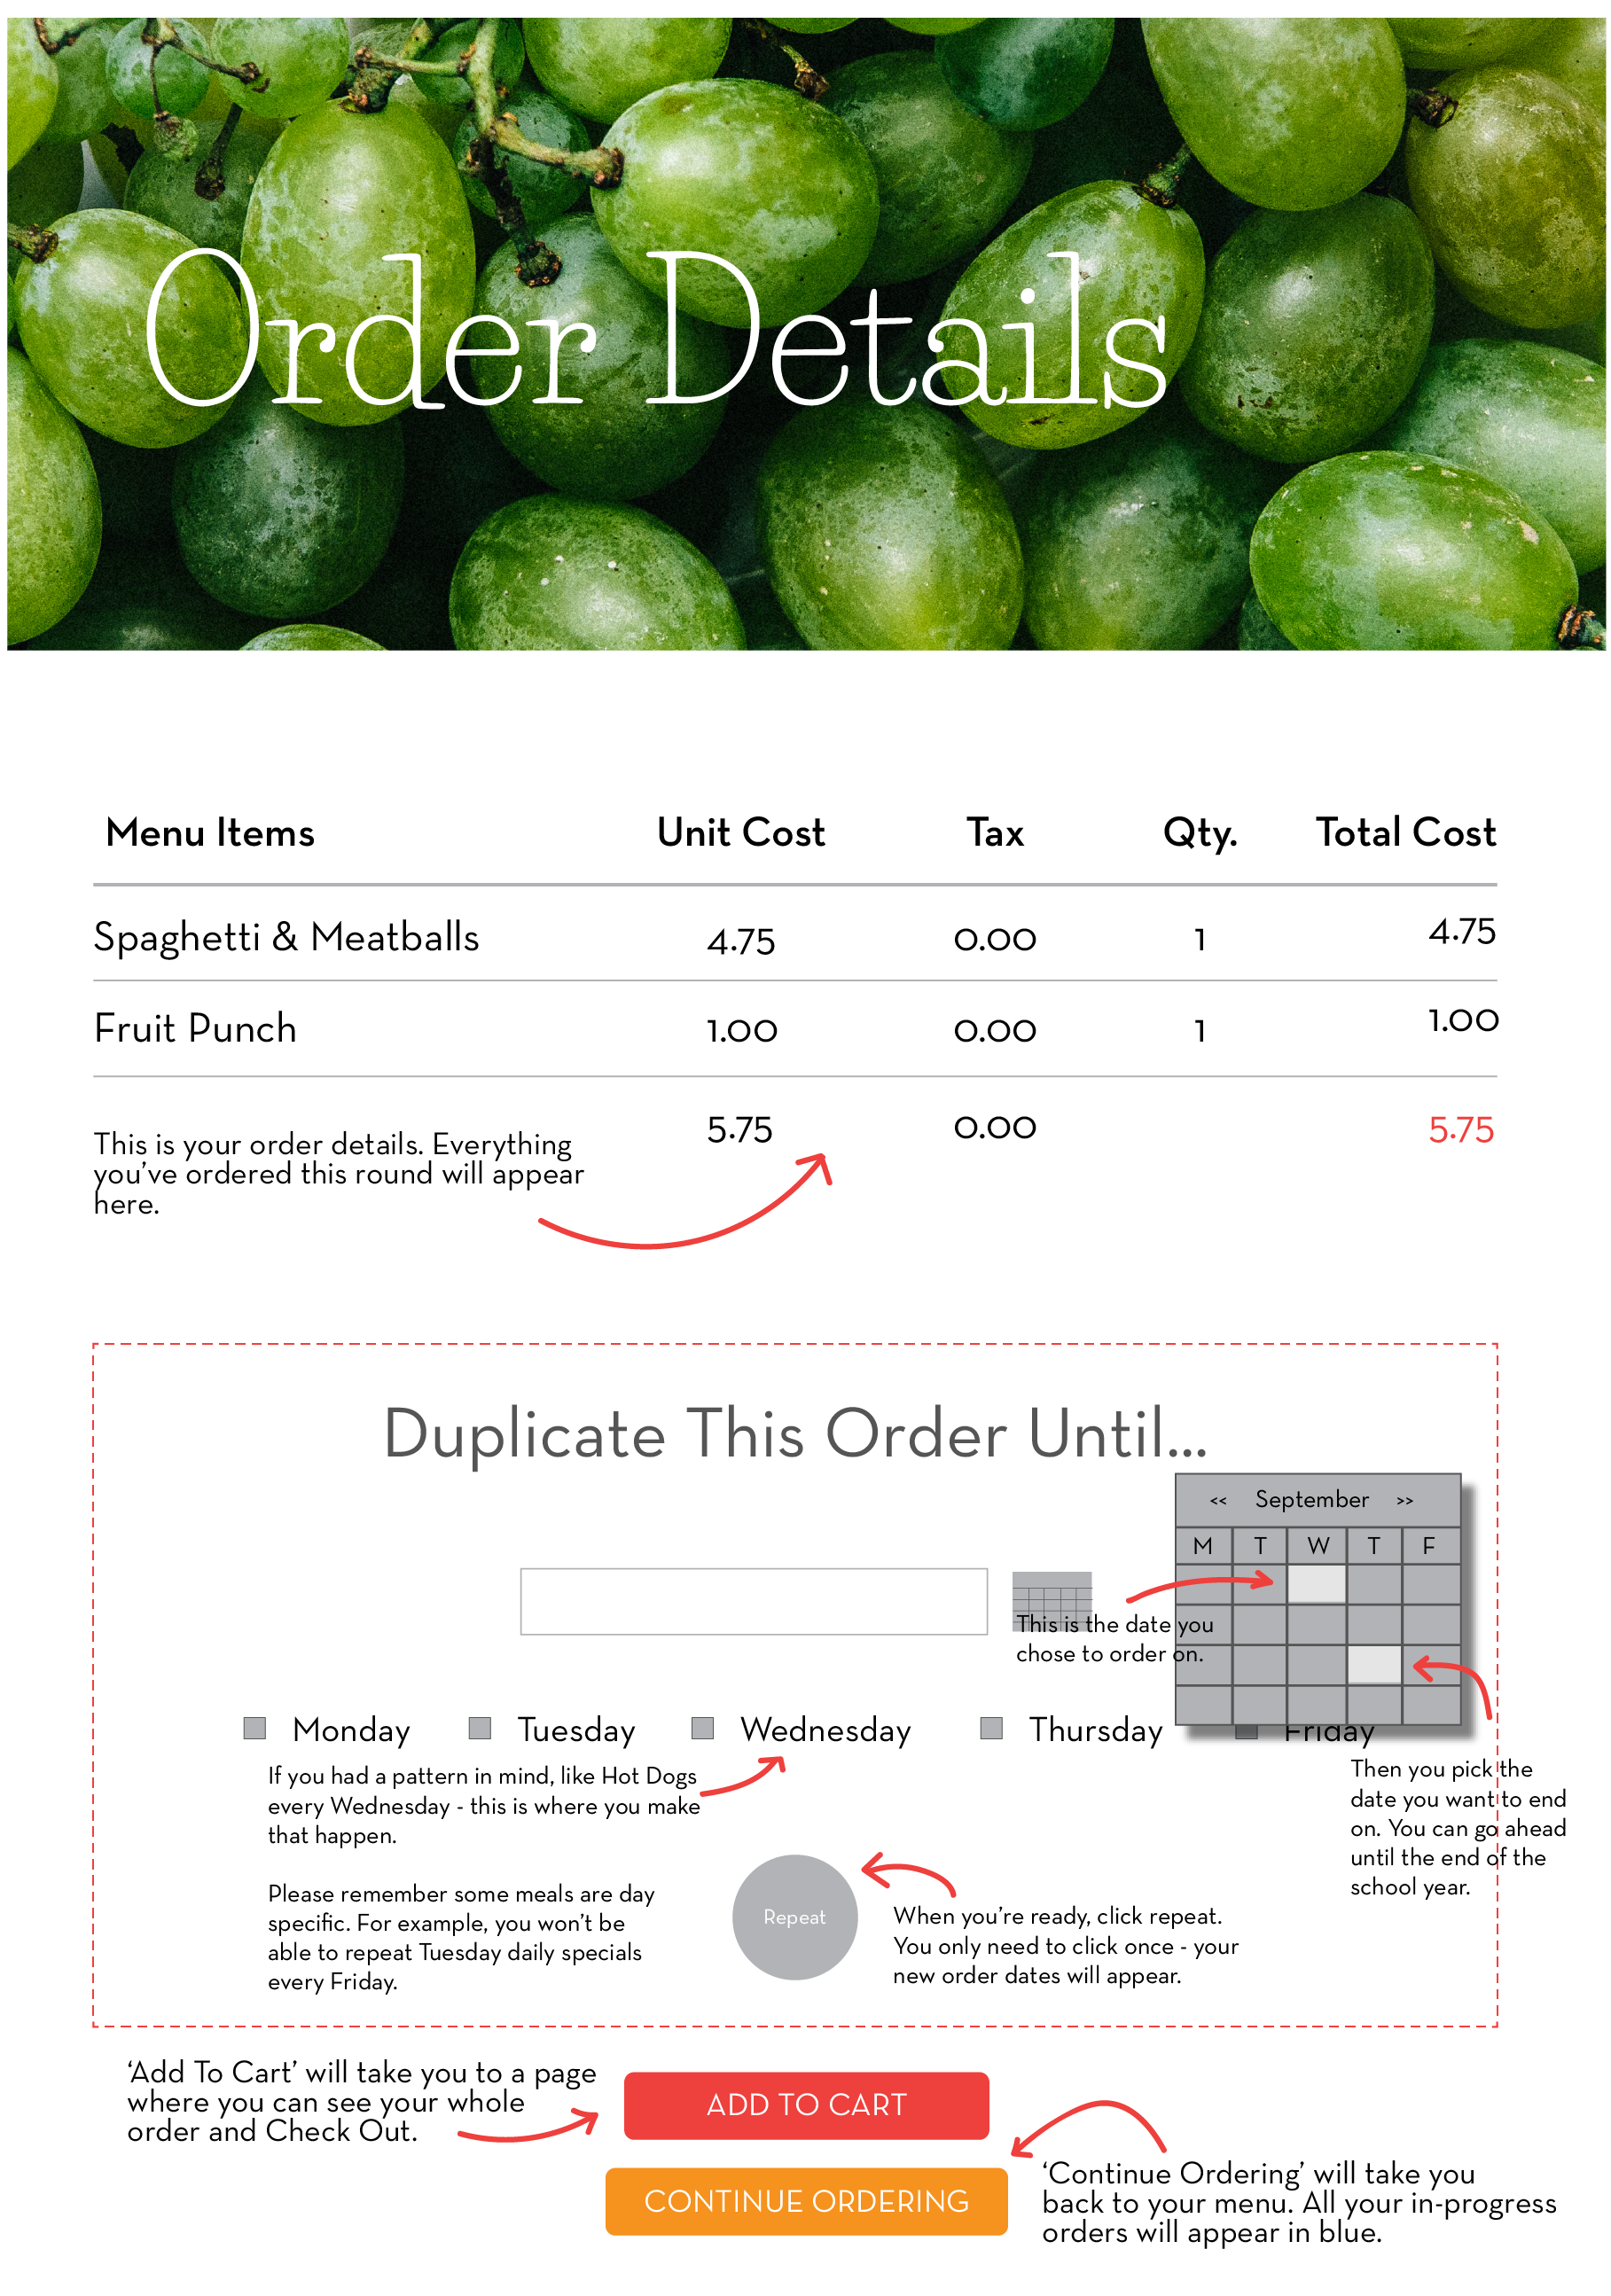 On the 'Order Details' you're current selection will be listed with prices and totals. On this page you can also duplicate the order over multiple months and weeks, so long as the food is offered on those days. If you are satisfied with this order, you can click 'Add To Cart' and proceed through to the payment page to review your whole pending order. Or you can click 'Continue Ordering'(below 'Add To Cart' button) to go back to the Calendar page and make another order.